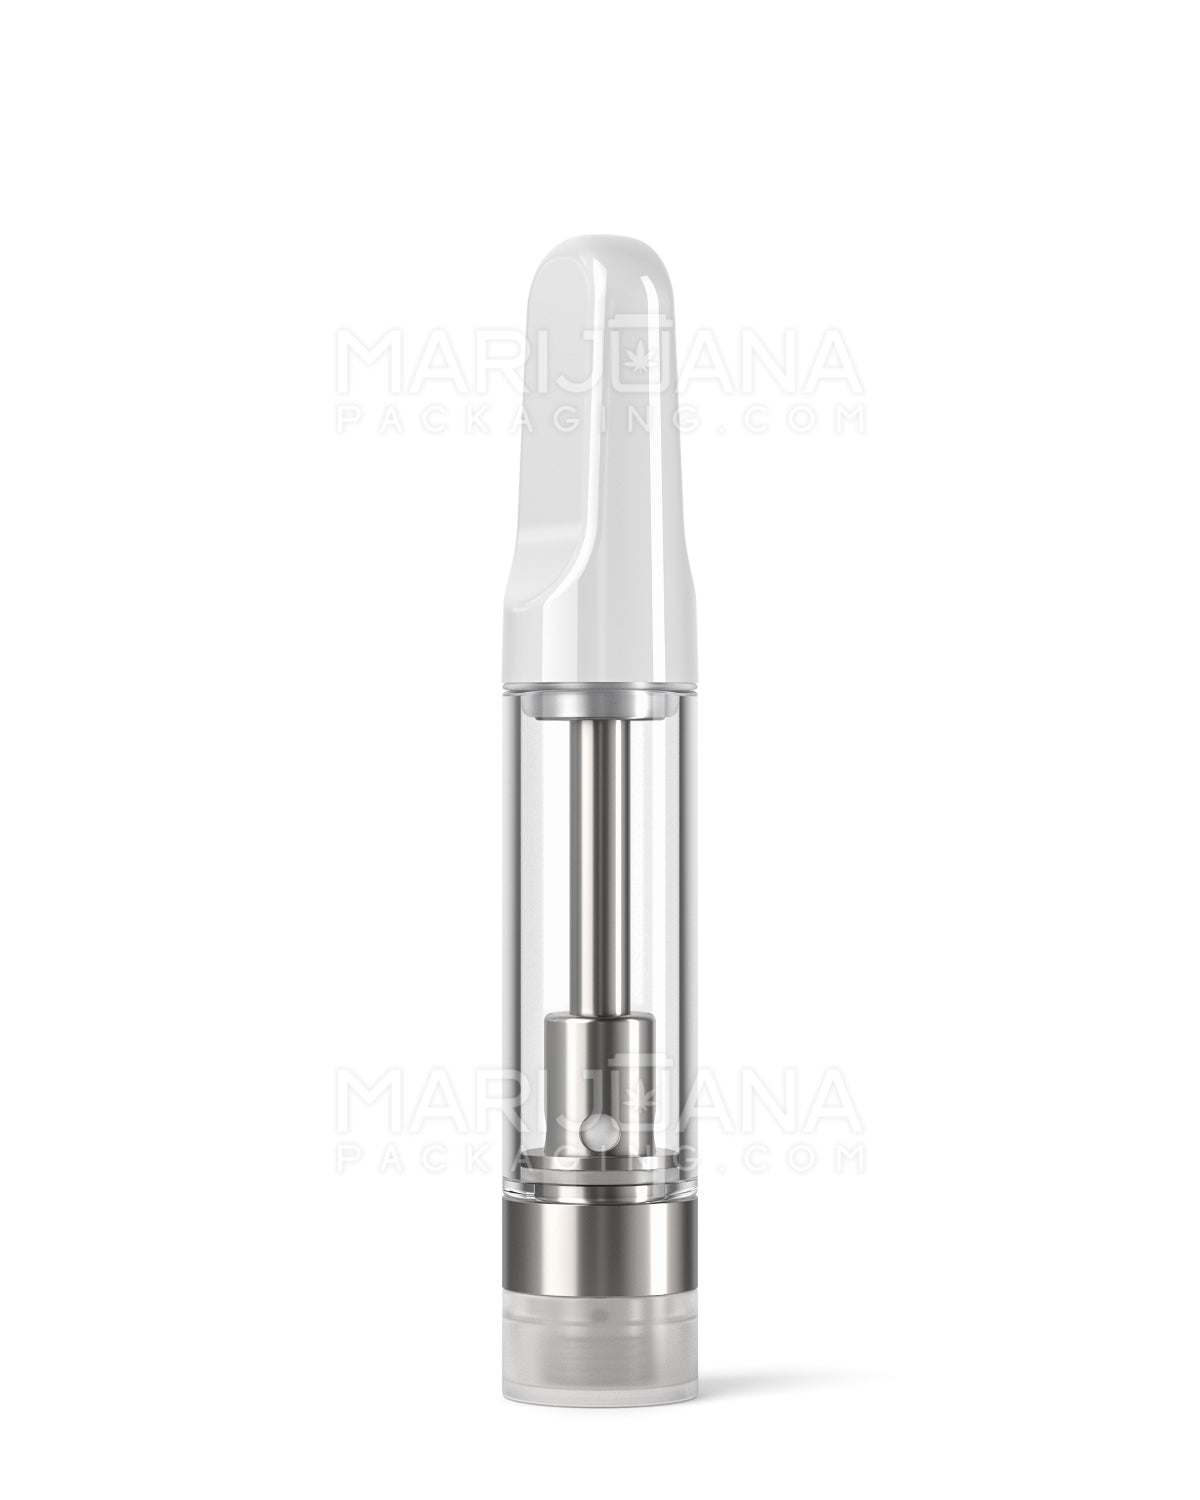 CCELL | Liquid6 Reactor Glass Vape Cartridge with White Ceramic Mouthpiece | 1mL - Screw On - 100 Count - 3